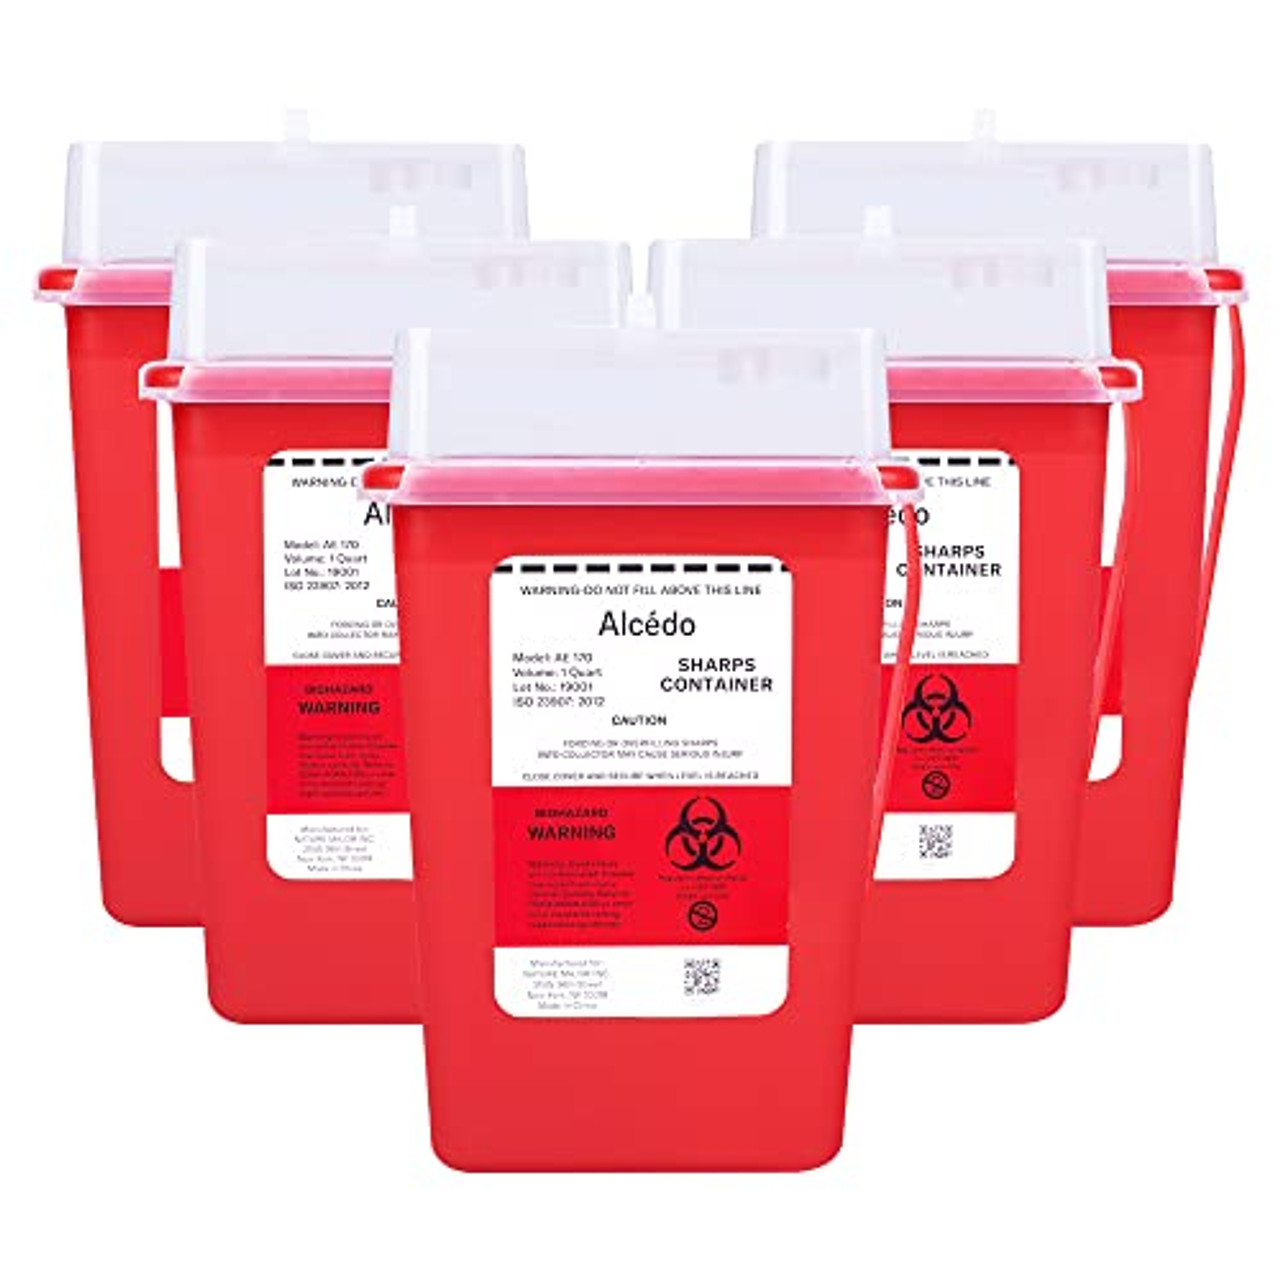 Alcedo Sharps Container for Use Container Syringe Disposal, Travel Small Professional Needle for Biohazard 1 and Portable (5-Pack), Home Quart and